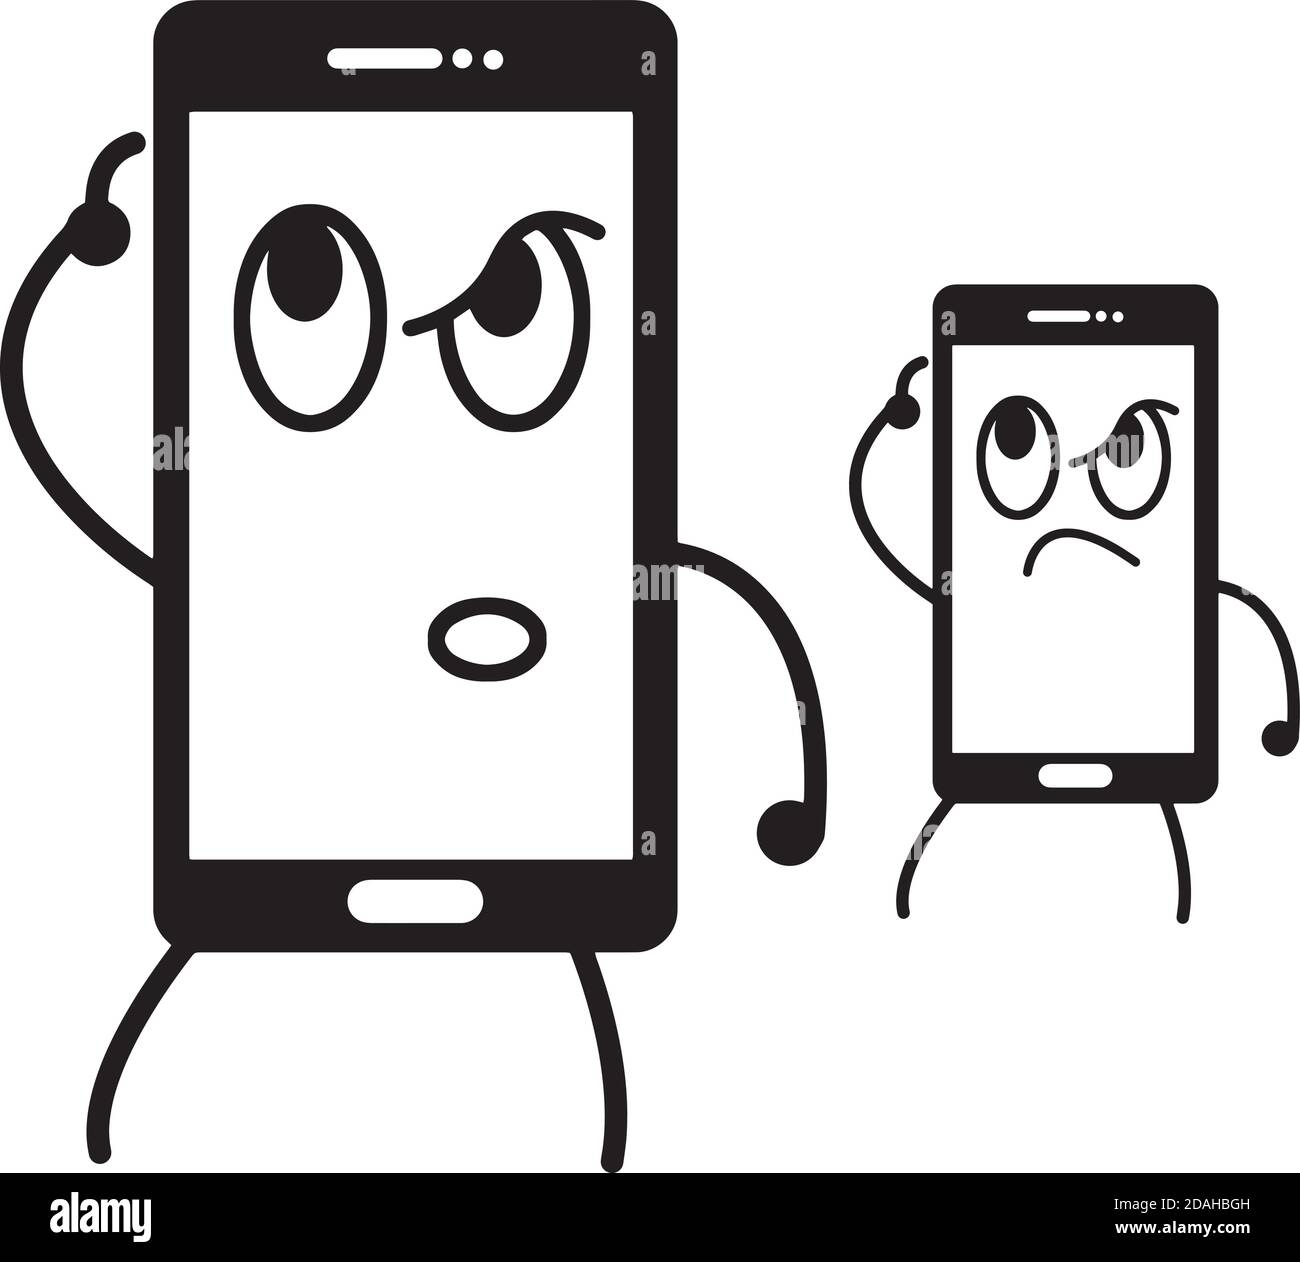 illustration vector of mobile phone with curious face, curiosity concept Stock Vector